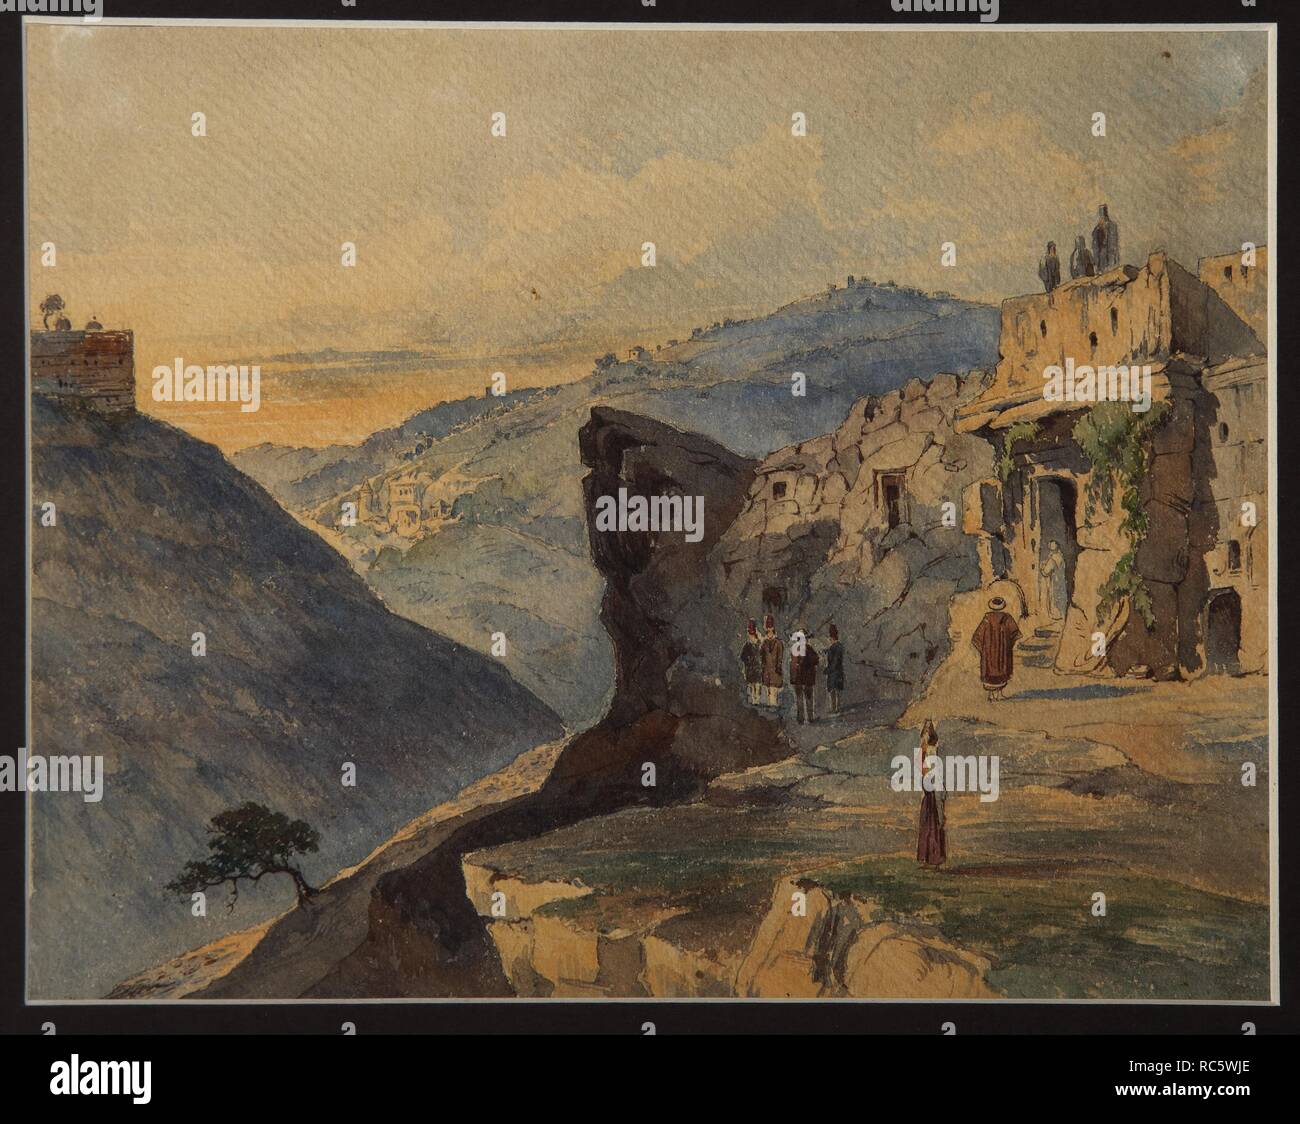 The Valley of Josaphat, the Mount of Olives, Siloam Village. Museum: State History Museum, Moscow. Author: Gerz, Konstantin Karlovich. Stock Photo